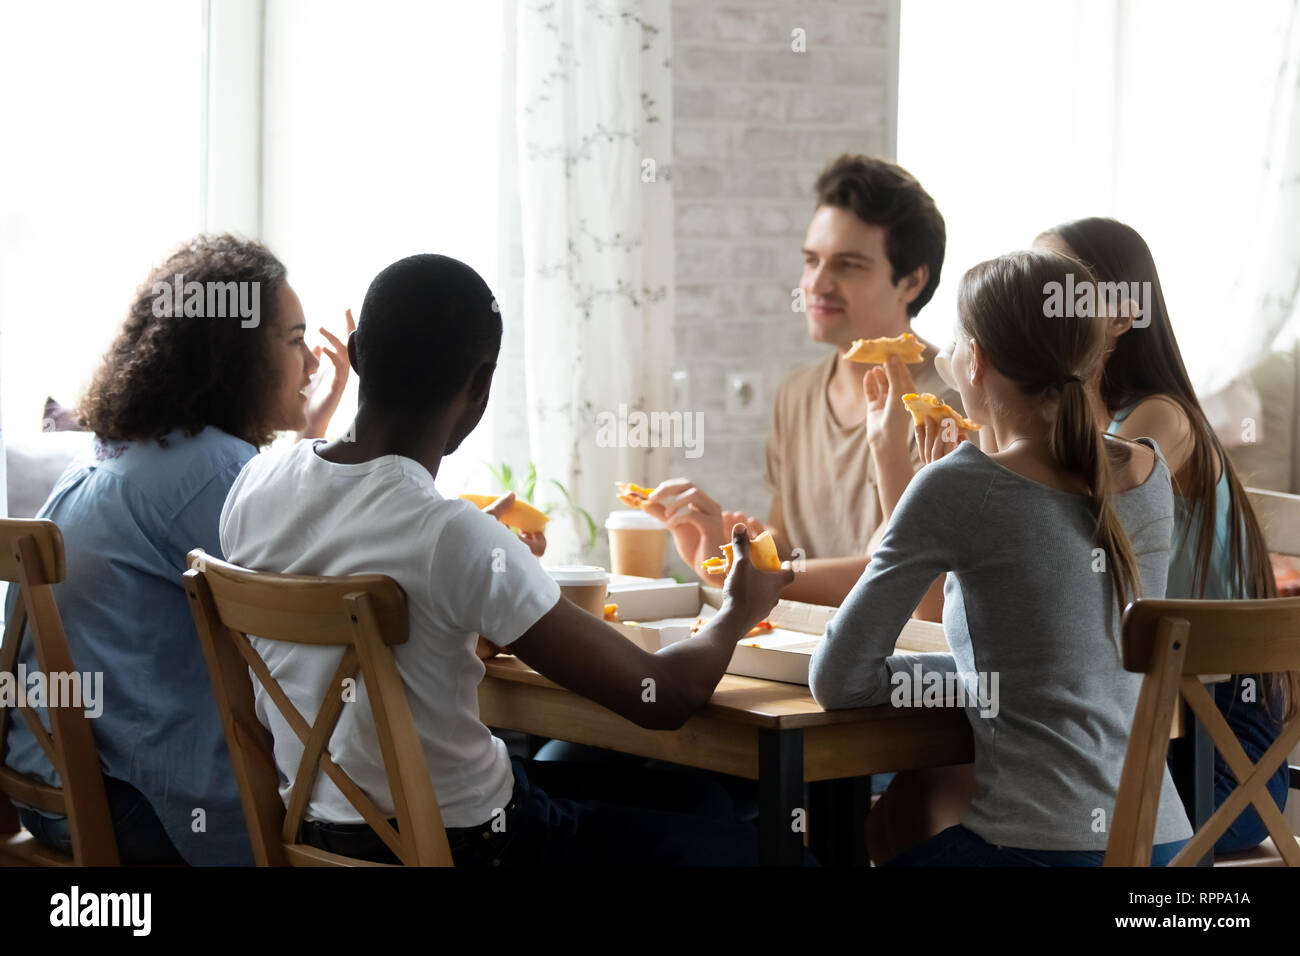 Multiracial friends having conversation and eating pizza in cafe Stock Photo